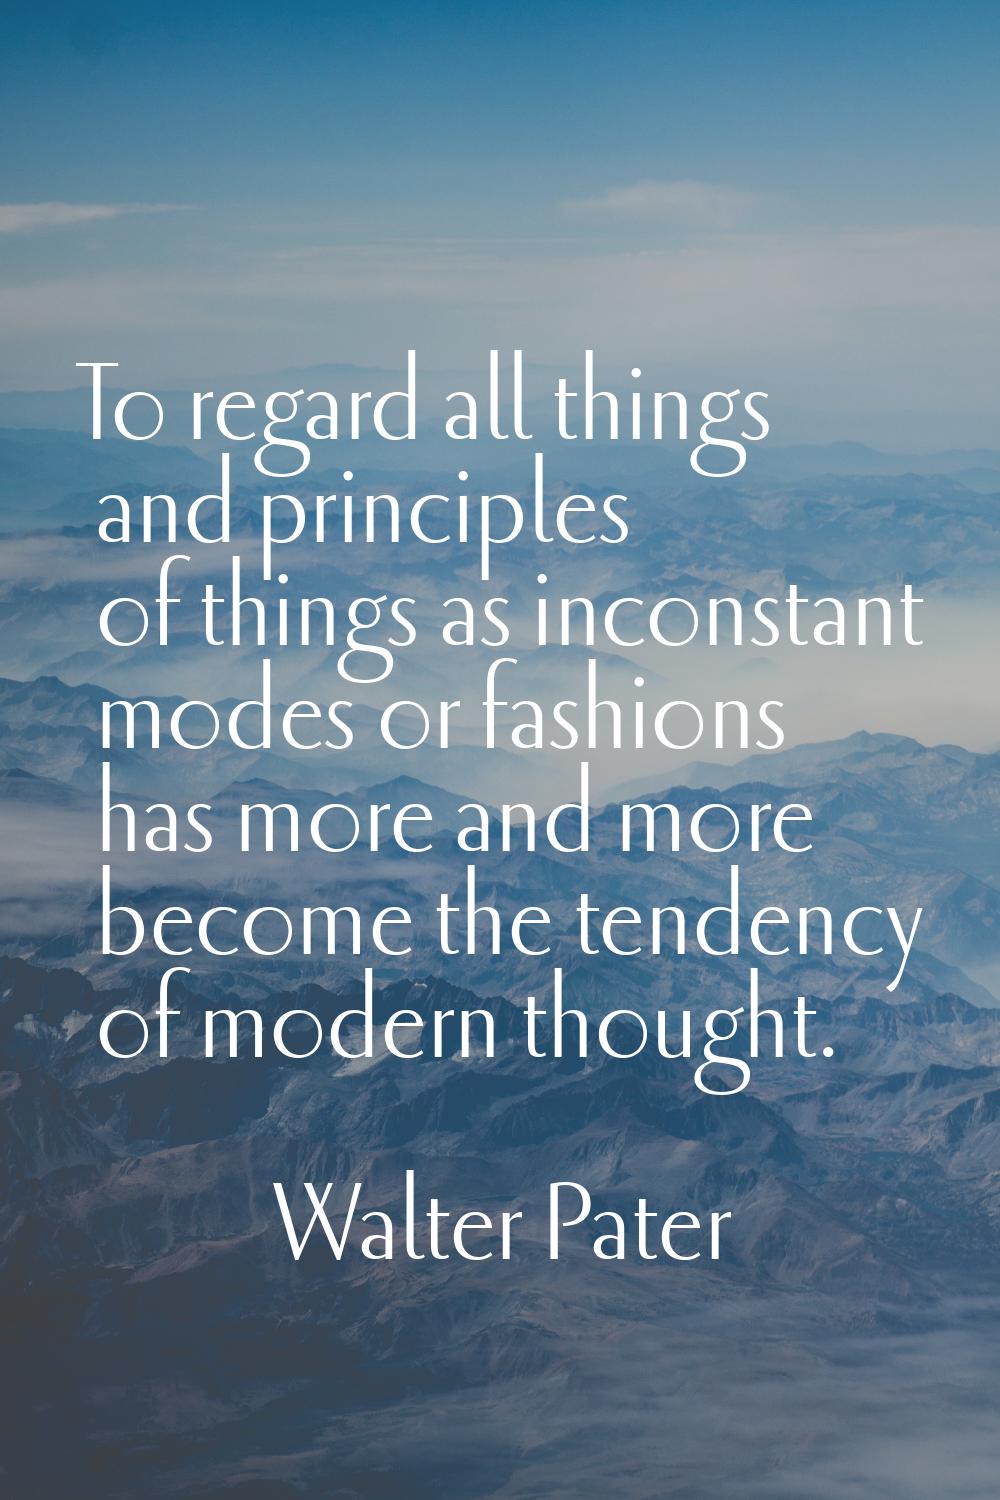 To regard all things and principles of things as inconstant modes or fashions has more and more bec